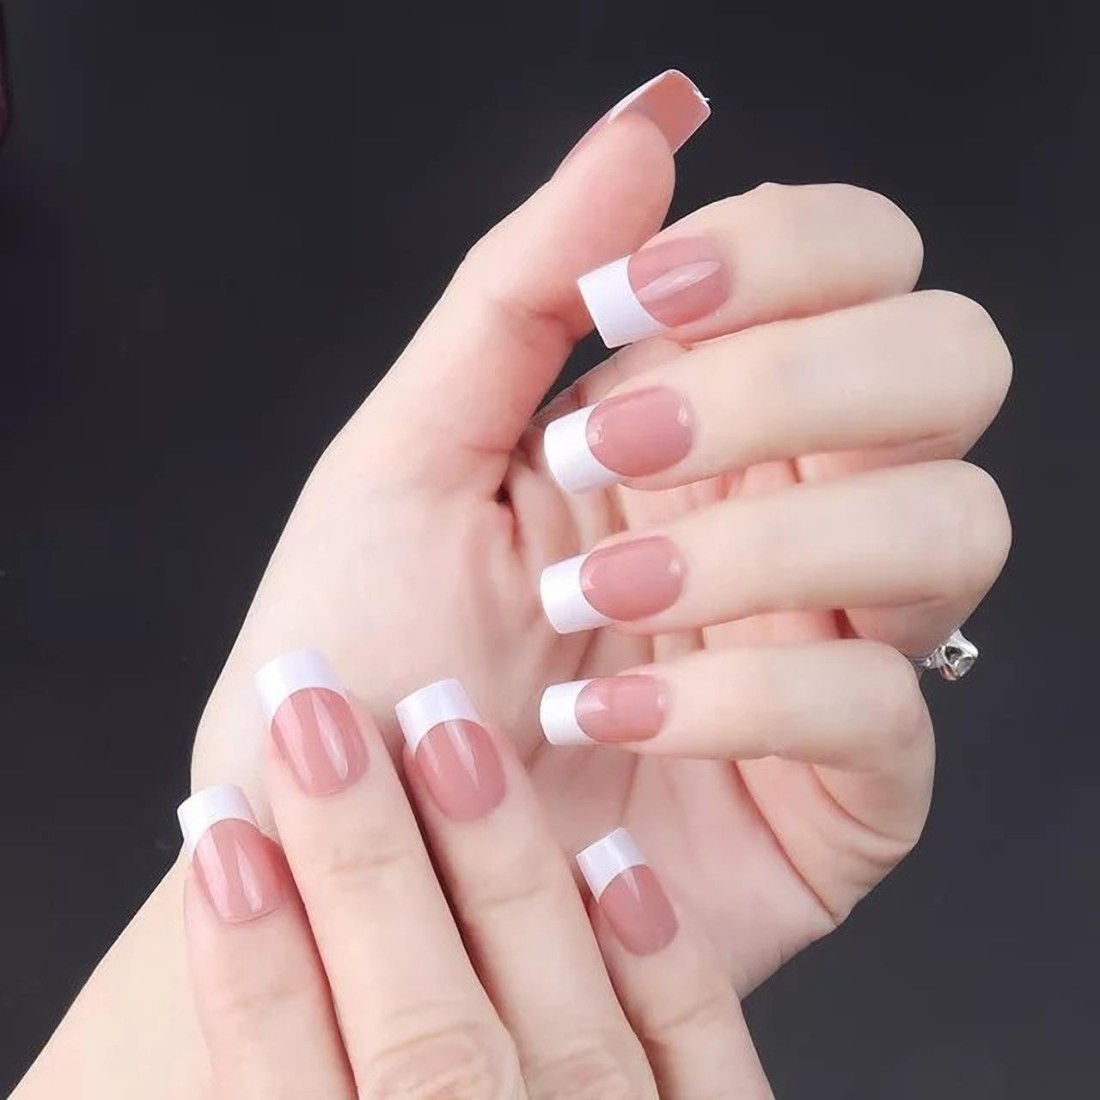 Posh - Guwahati - French manicure on gel nail extensions by using pinch of  golden glitters. Foils are used to Complete look. | Facebook